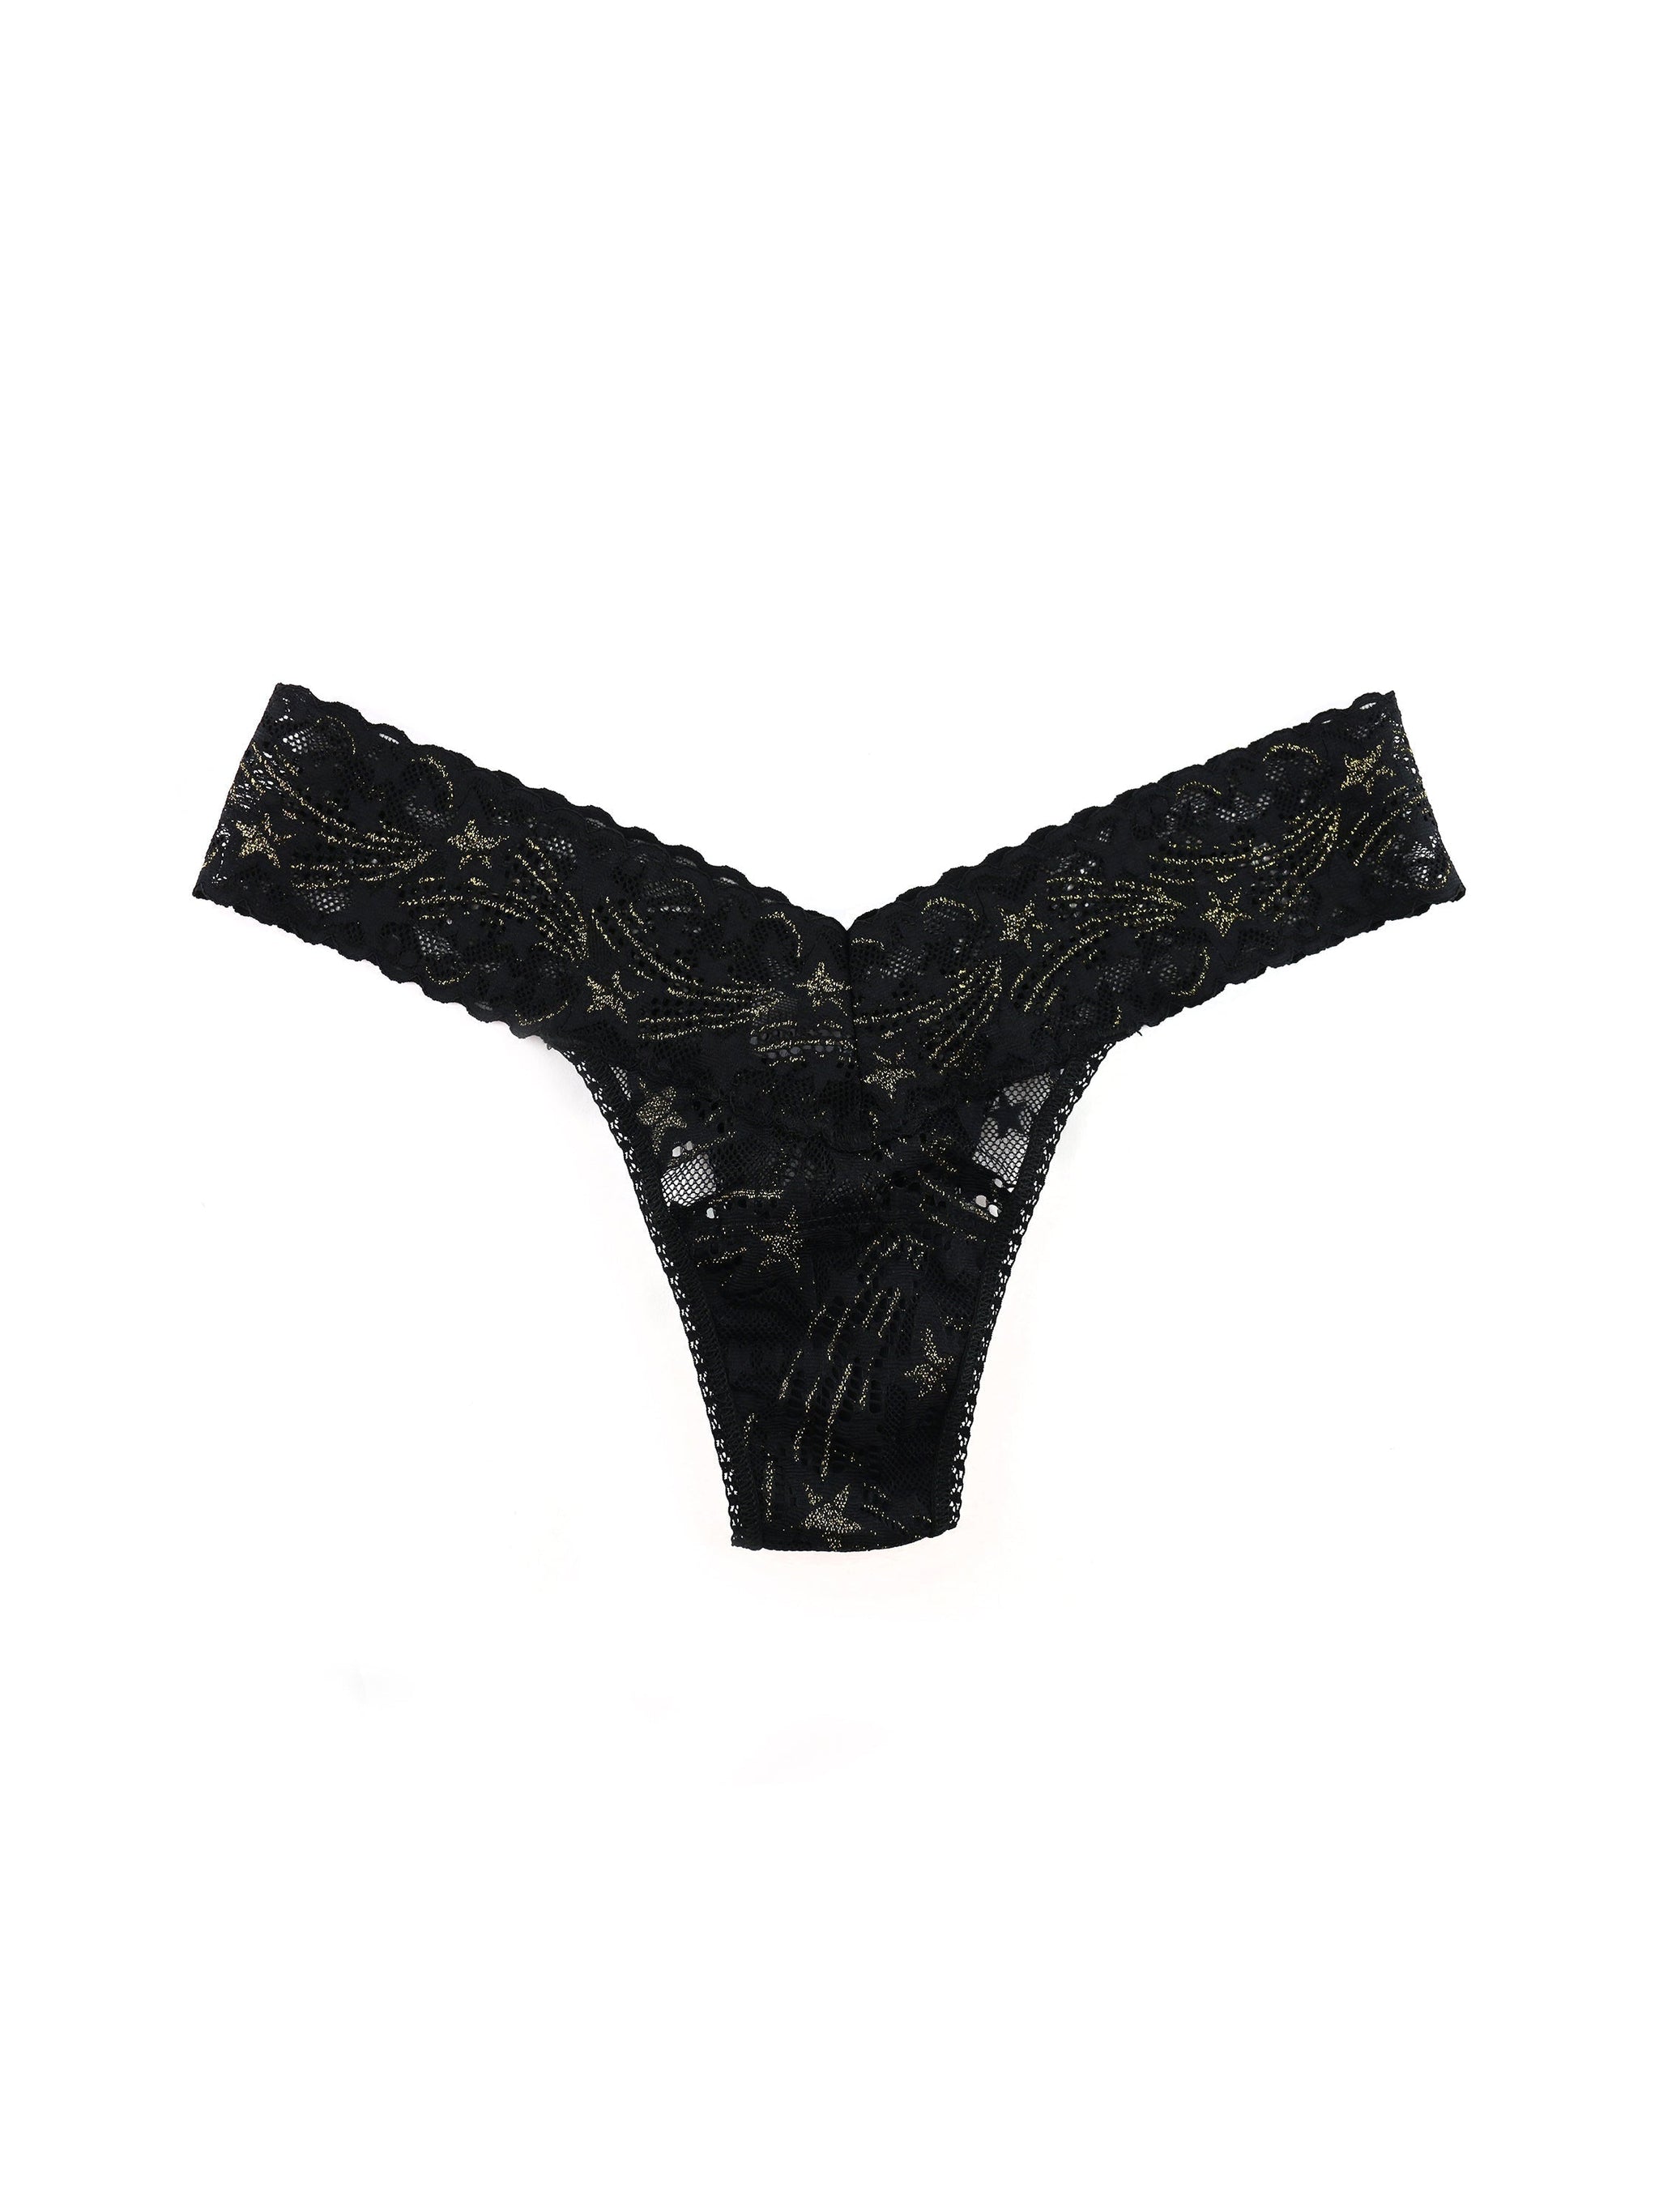 Petite Night Fever Low Rise Thong Sale